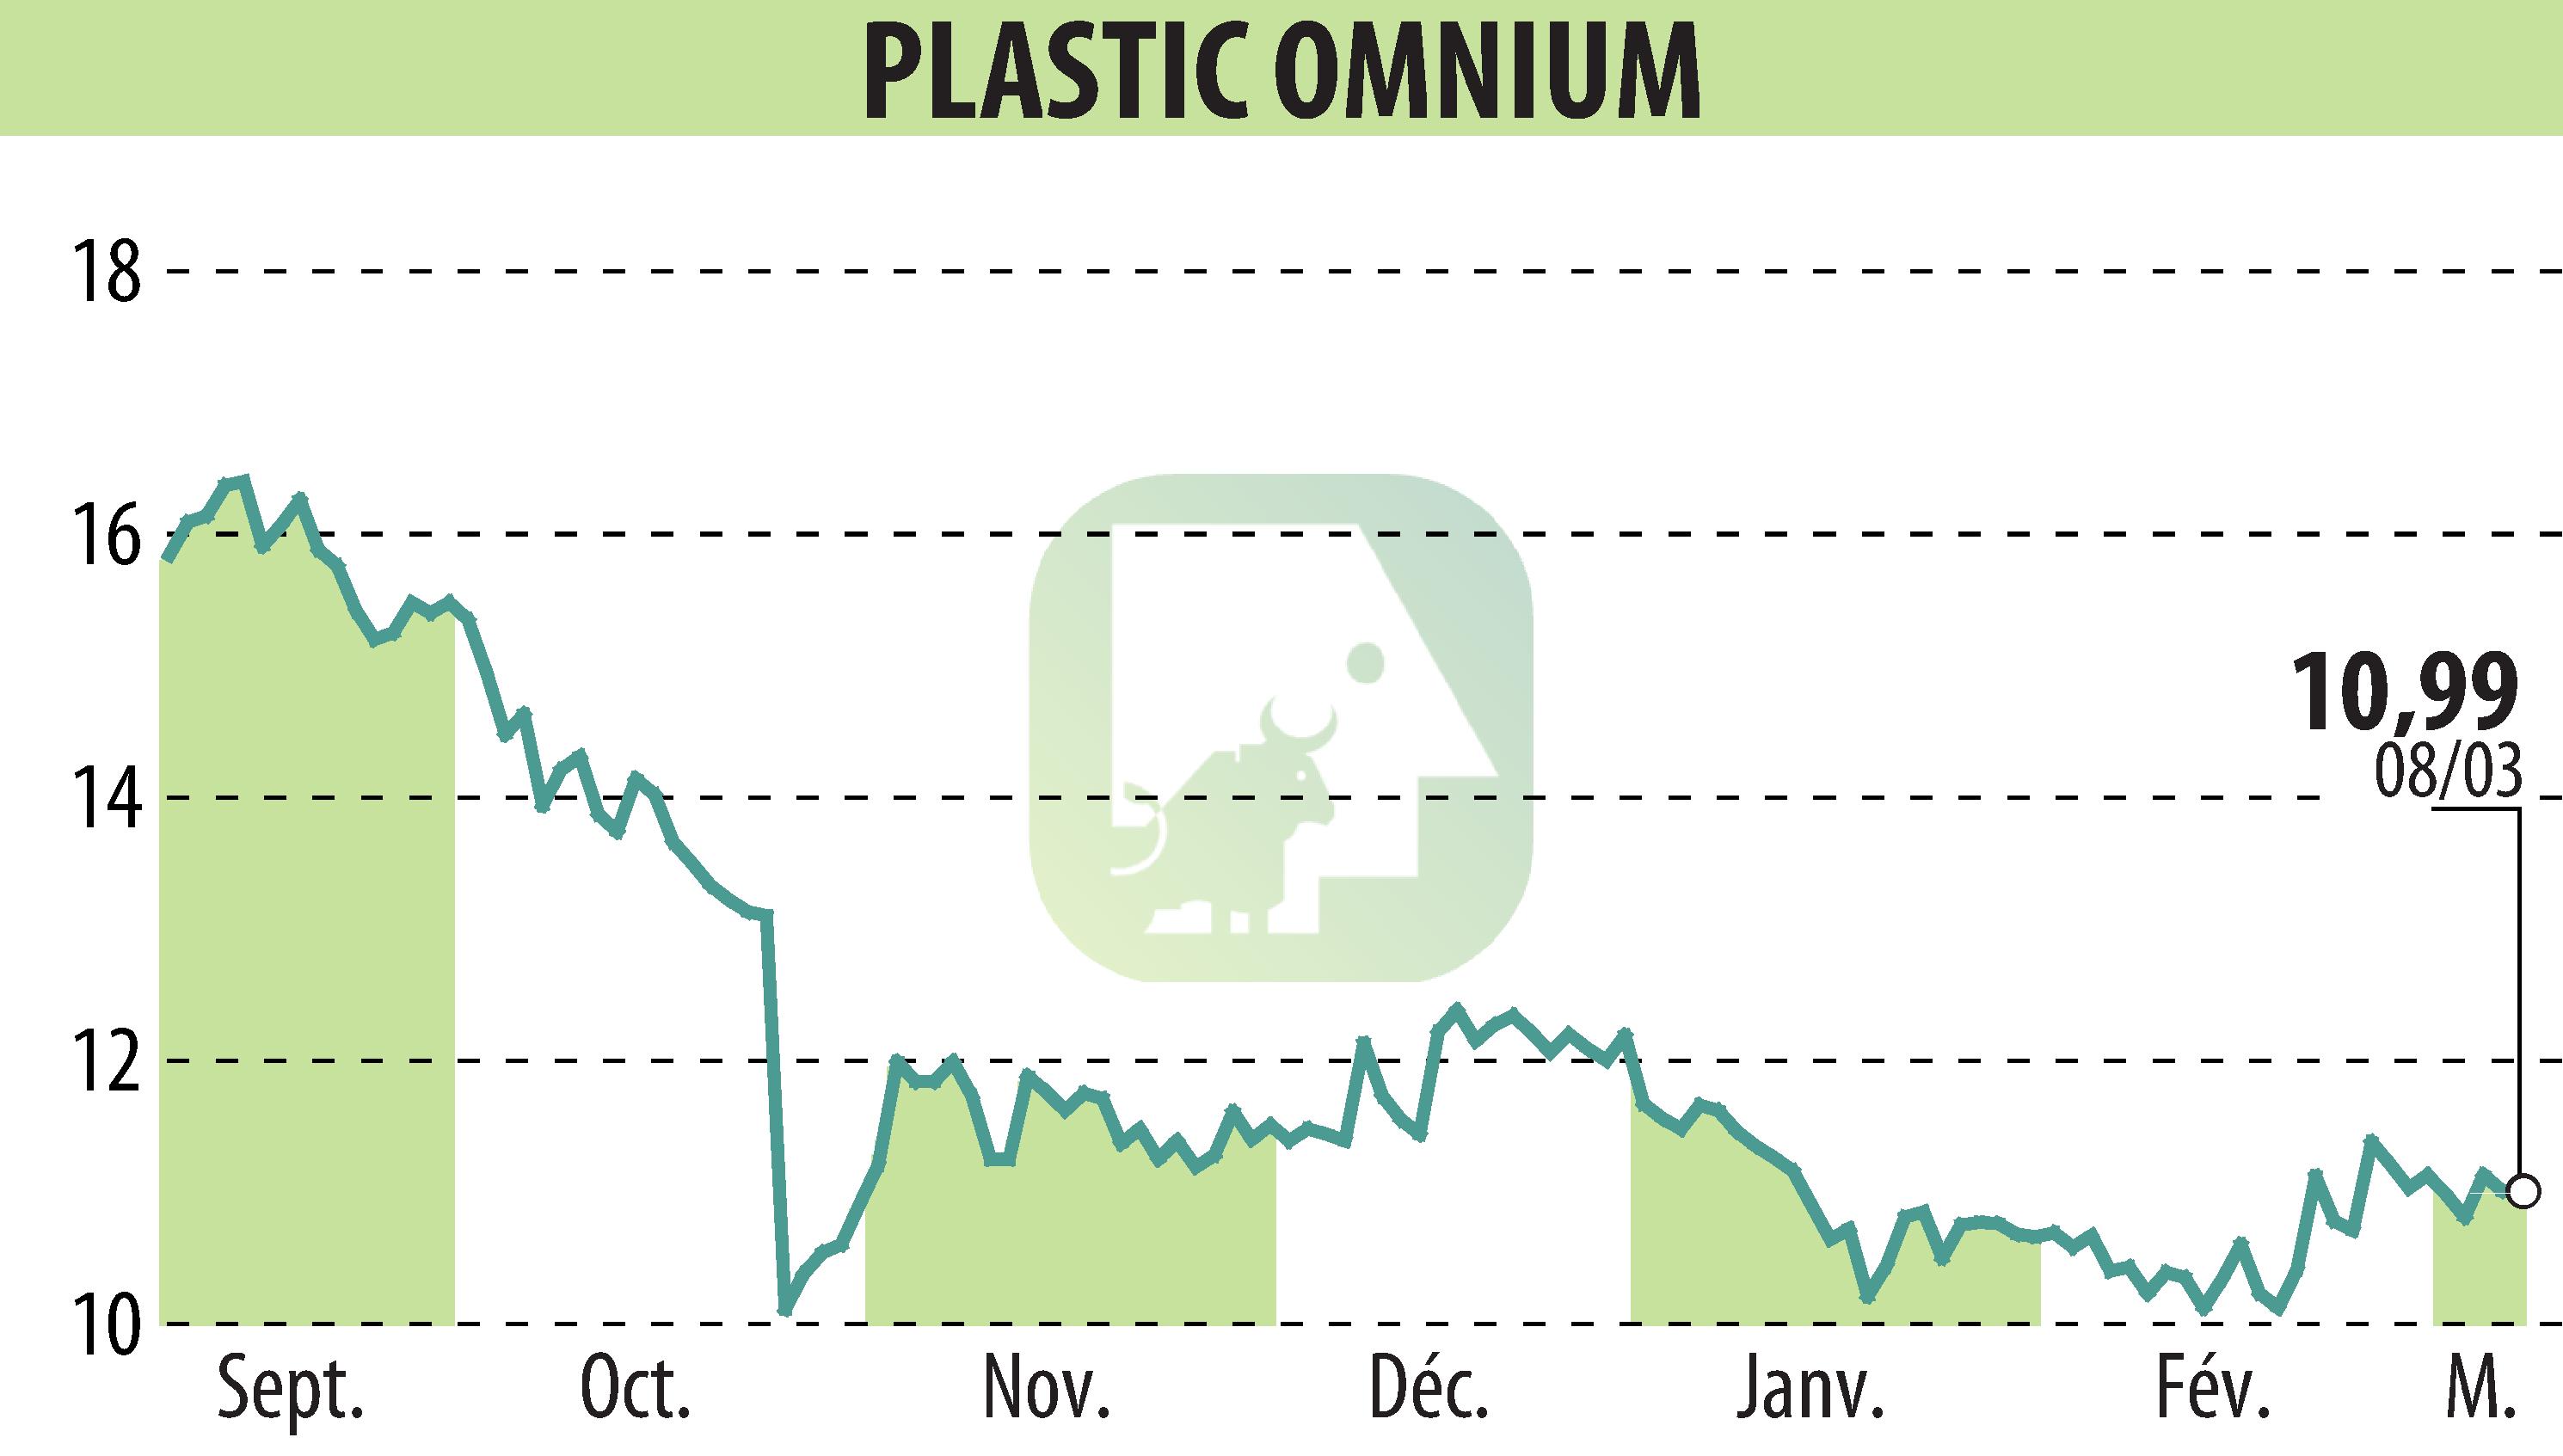 Stock price chart of PLASTIC OMNIUM (EPA:POM) showing fluctuations.